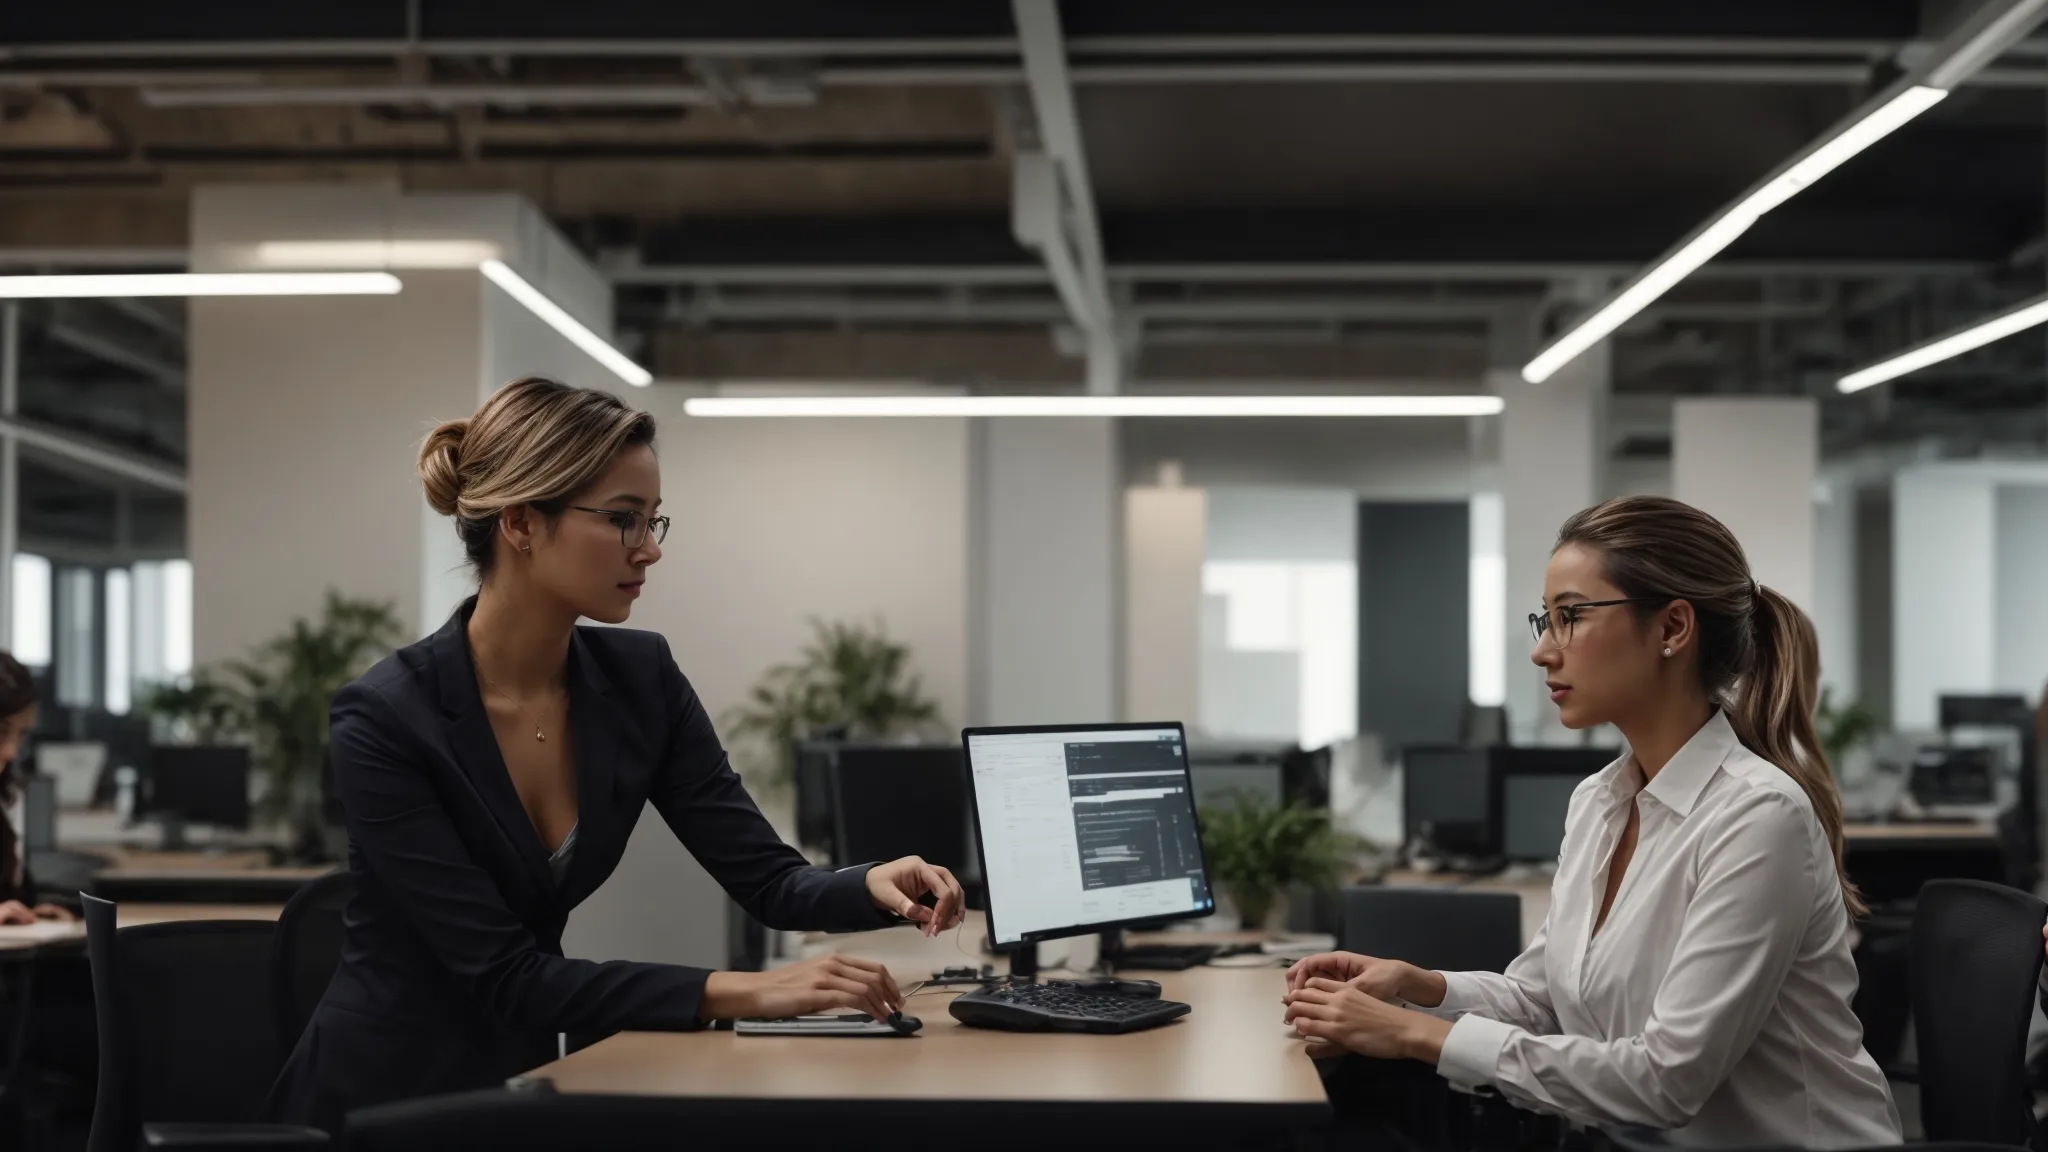 two female seo professionals are working together at a large monitor, discussing strategies in an open-plan office.